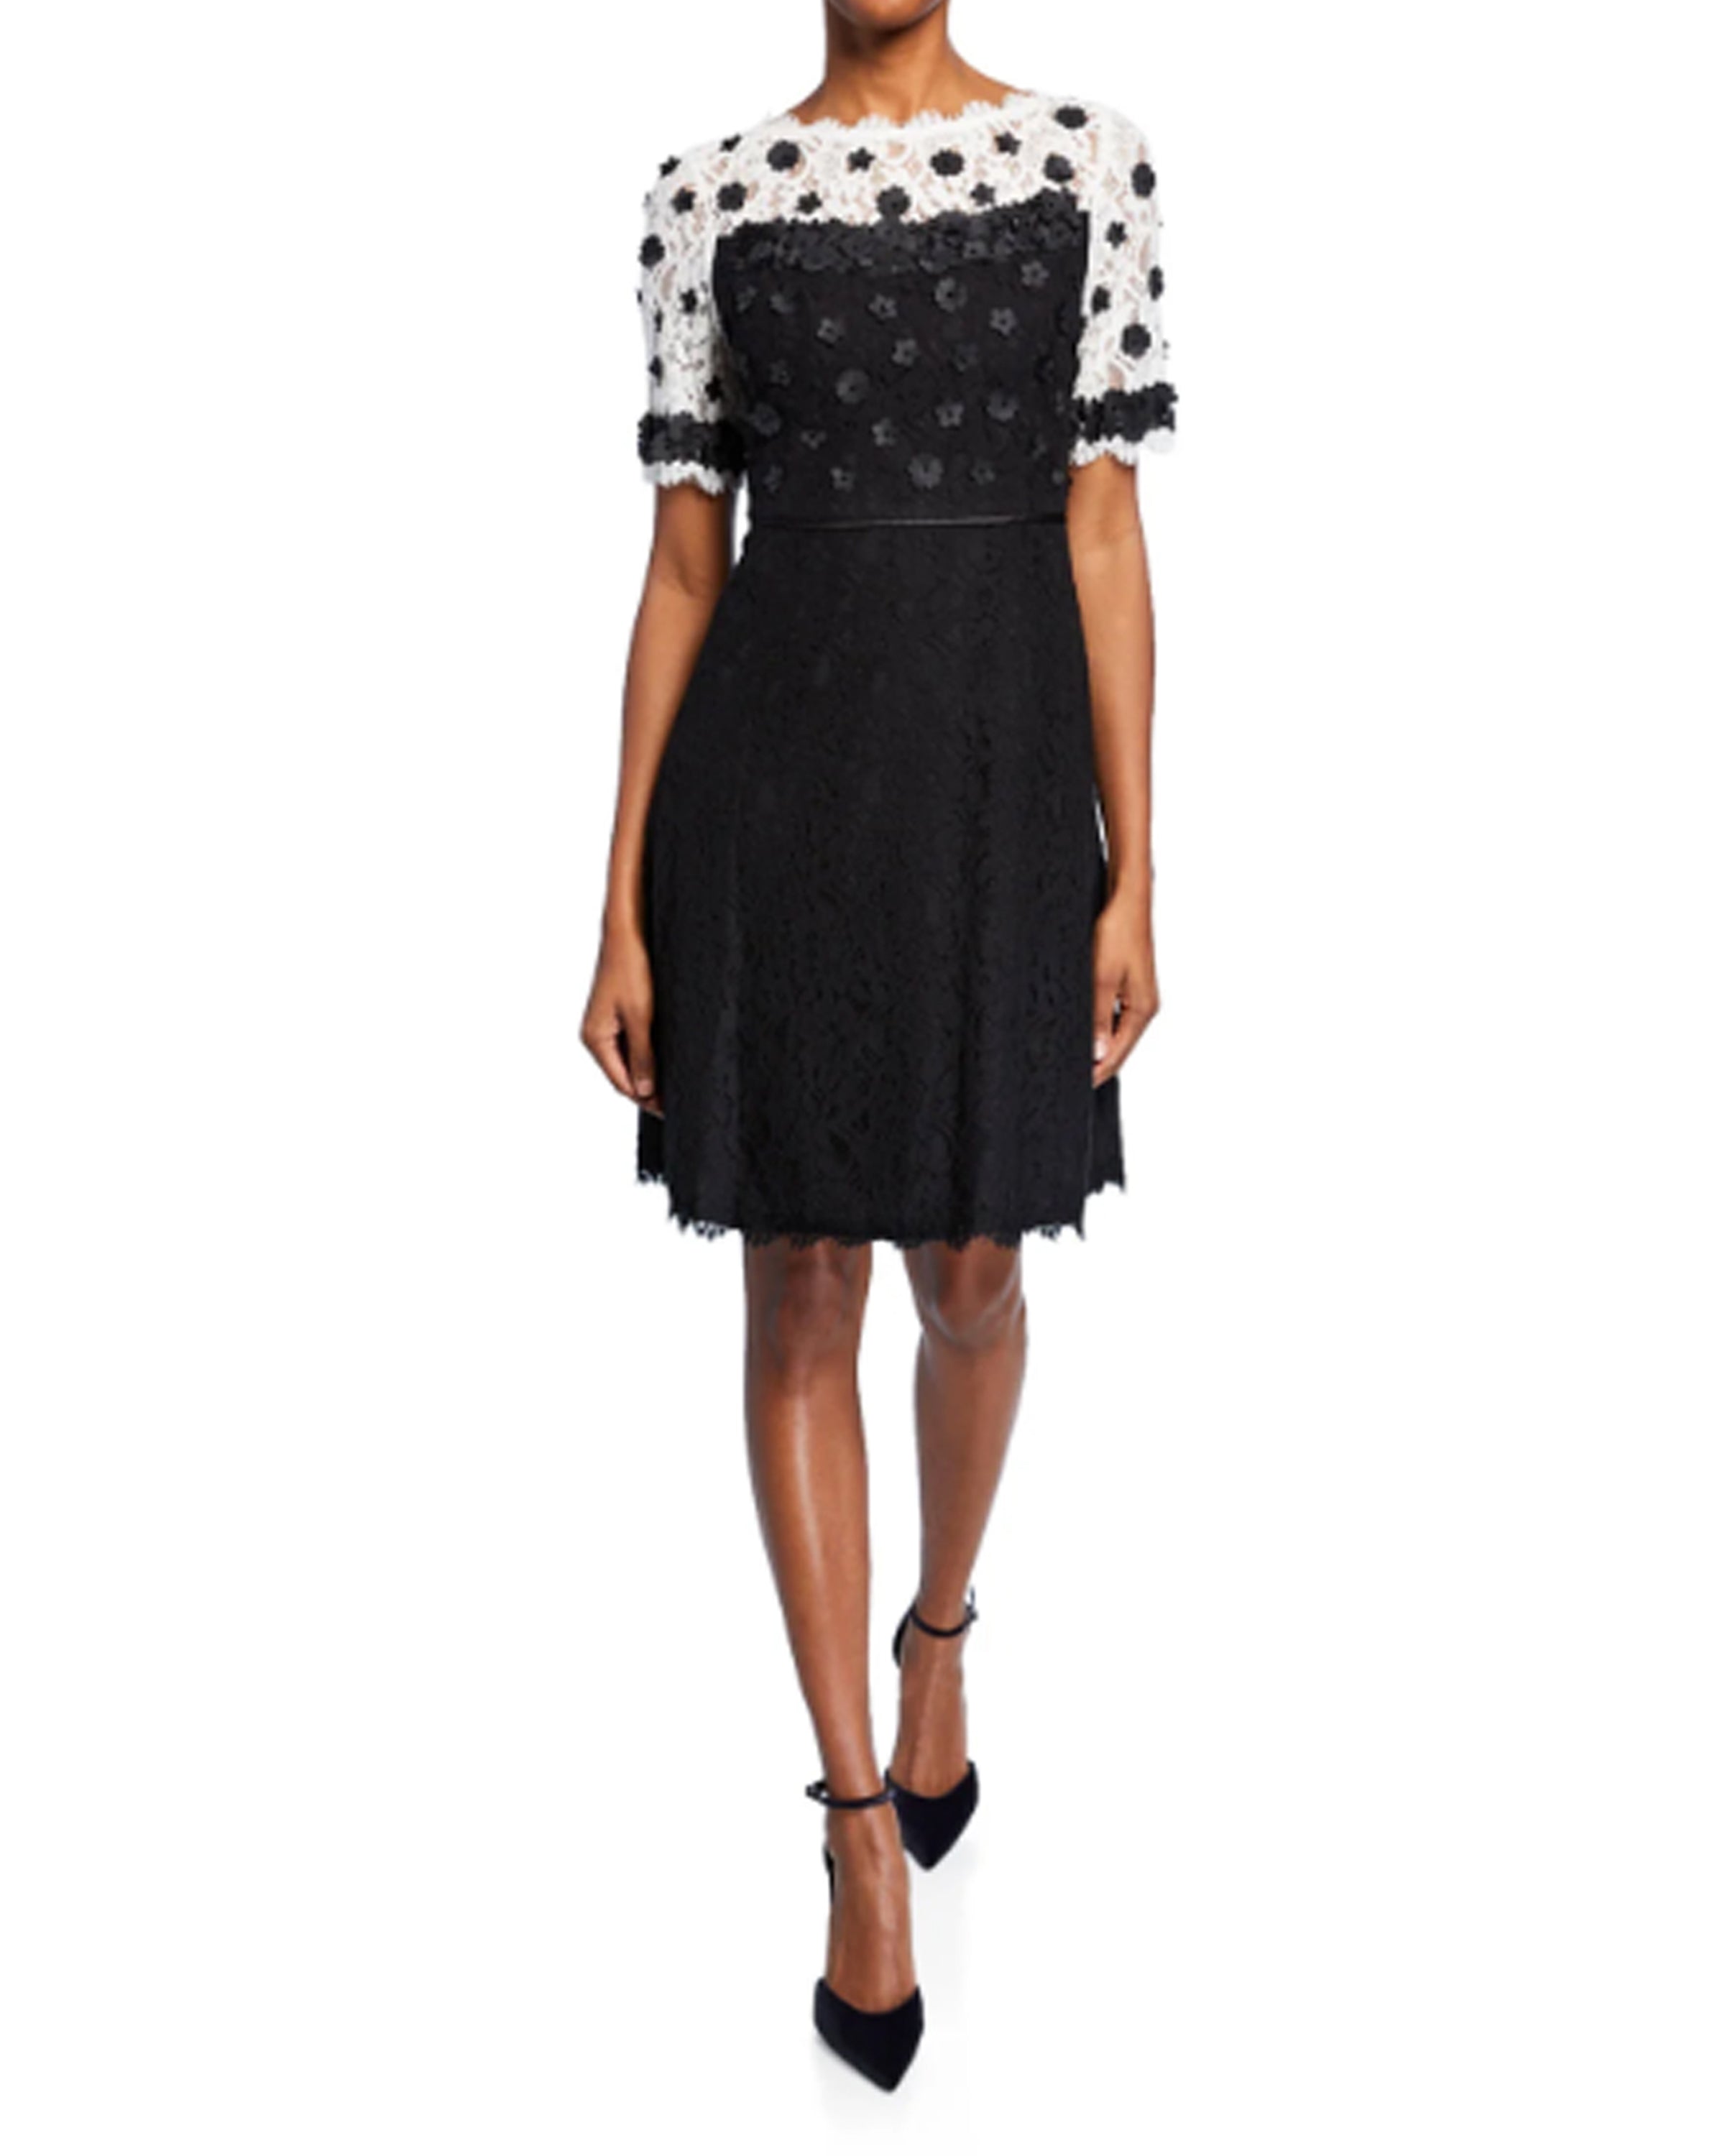 Floral Applique Fit and Flare Lace Dress